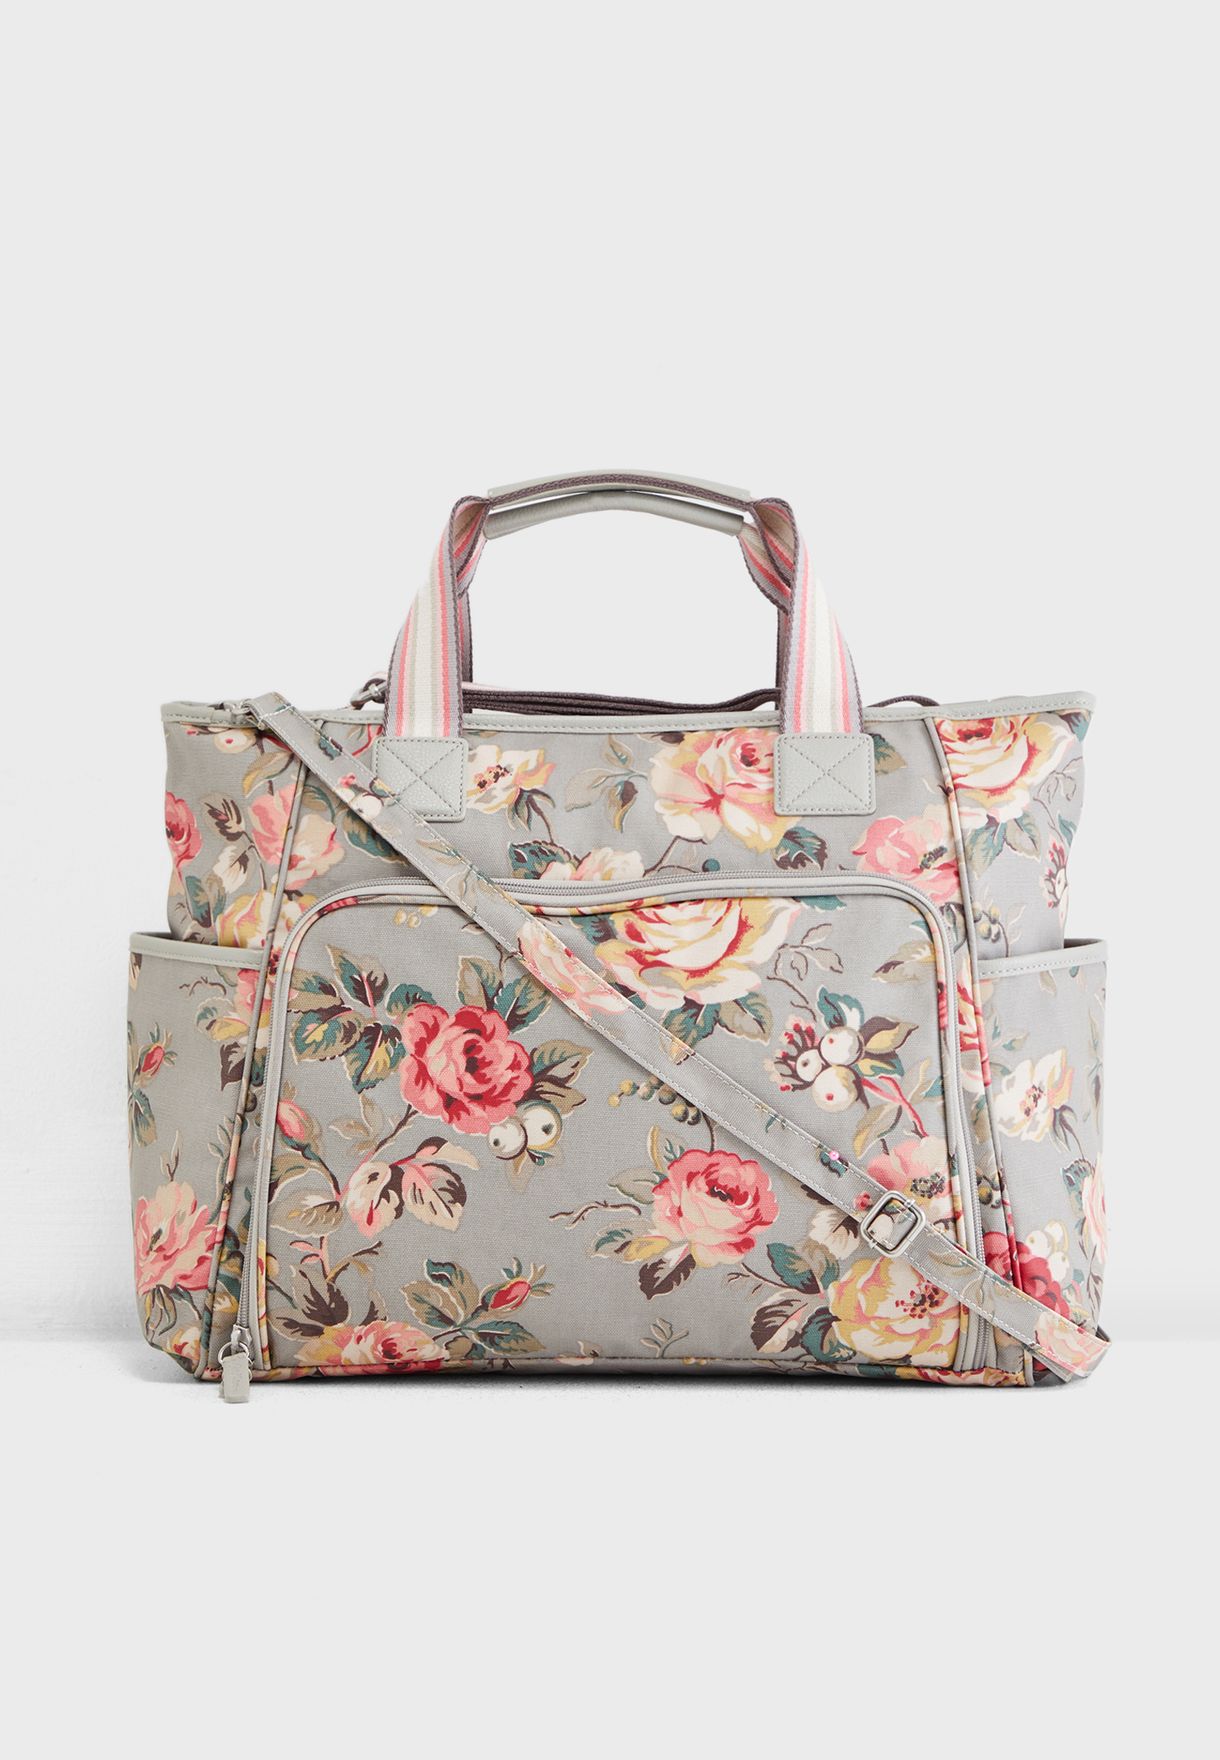 cath kidston nappy changing bag